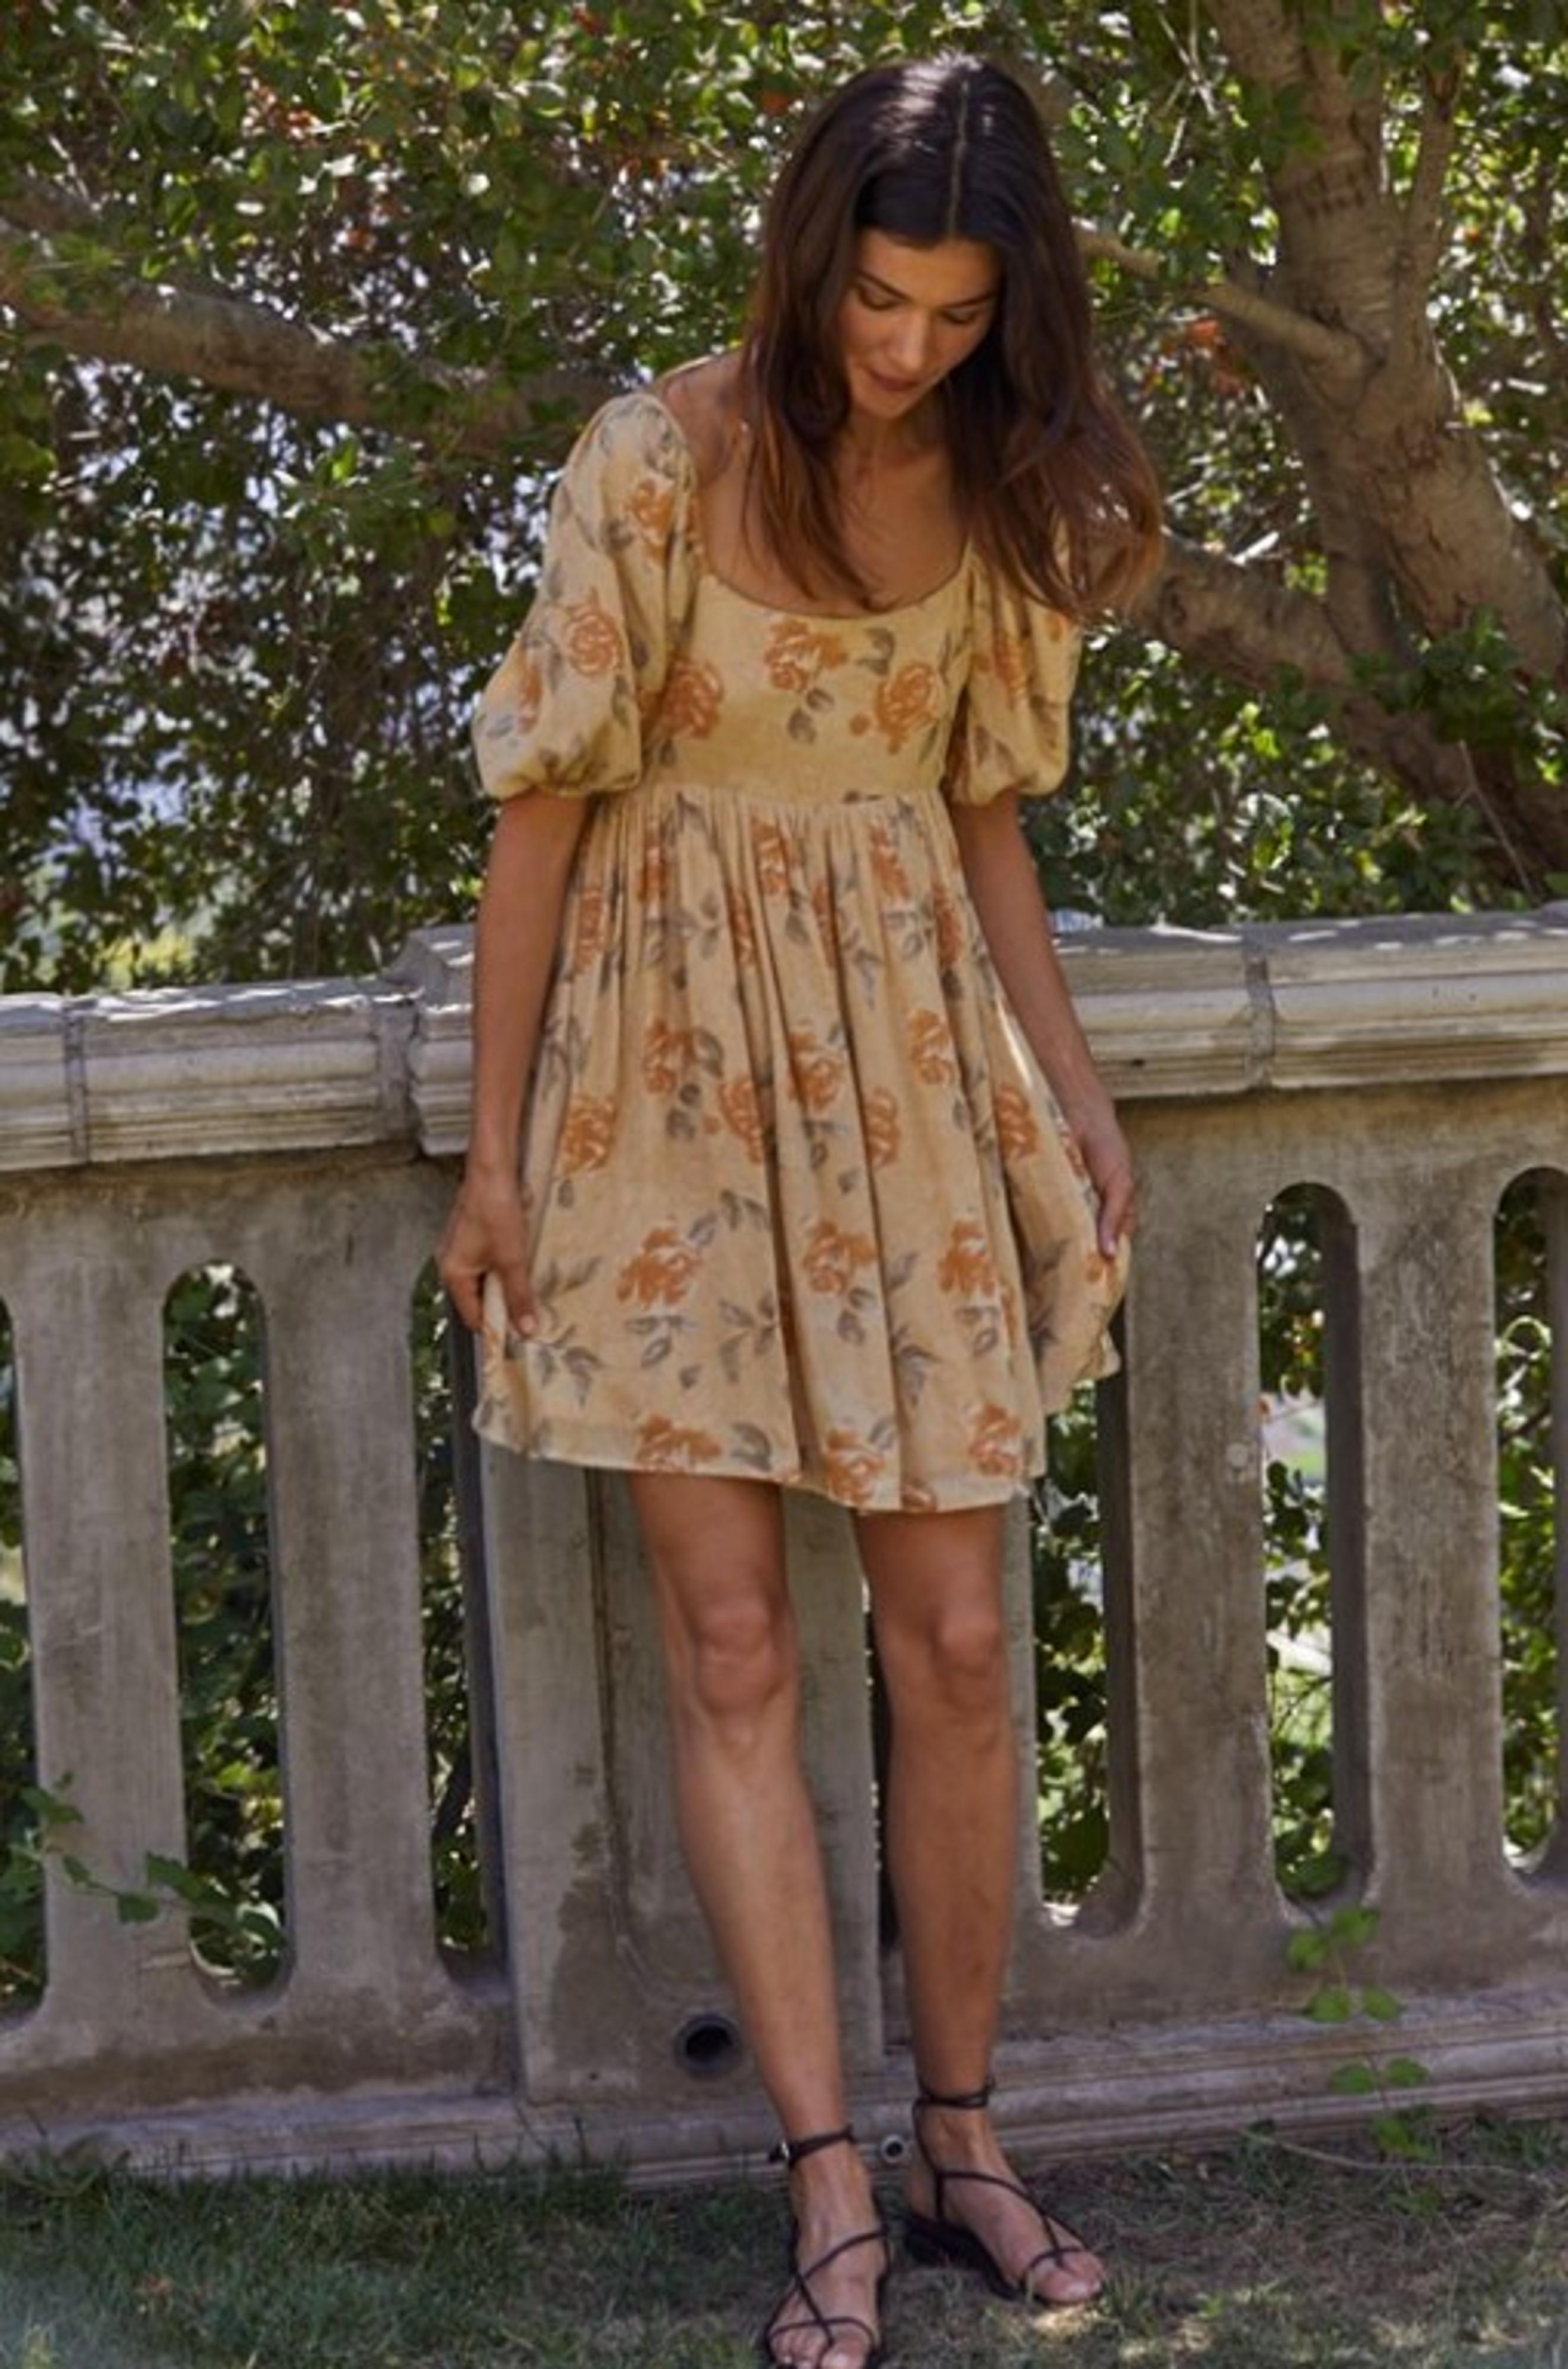  Through The Meadow Floral Babydoll Dress